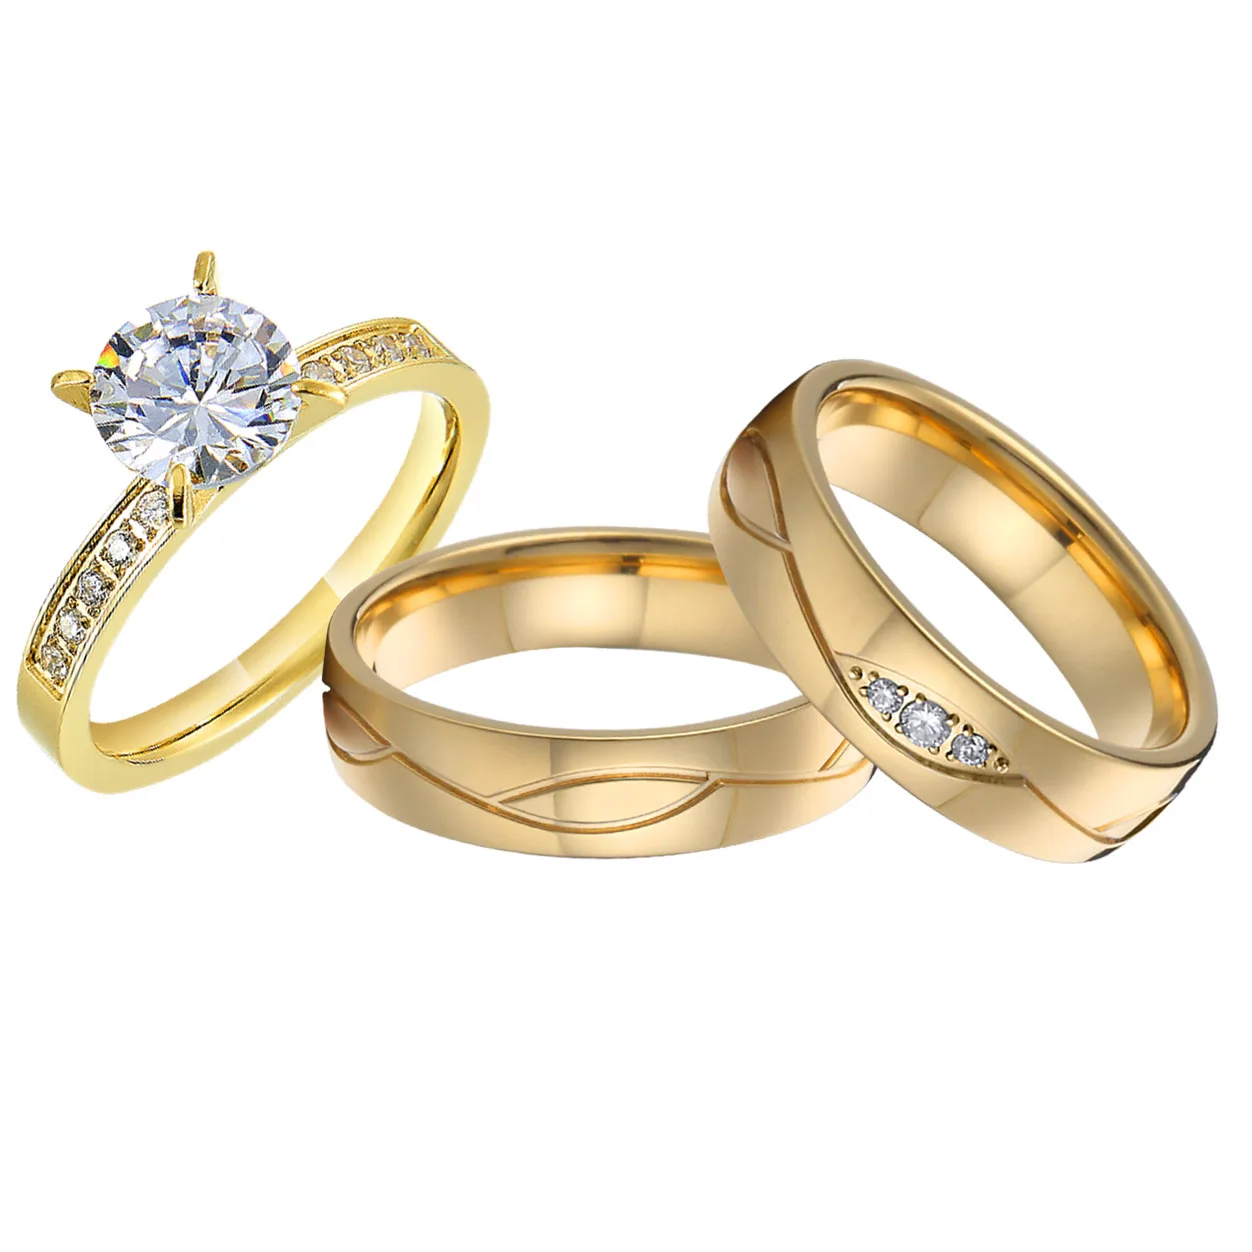 

24k gold plated marriage engagement ring 3pcs lover's alliances proposal promise cz diamond wedding rings sets for couples